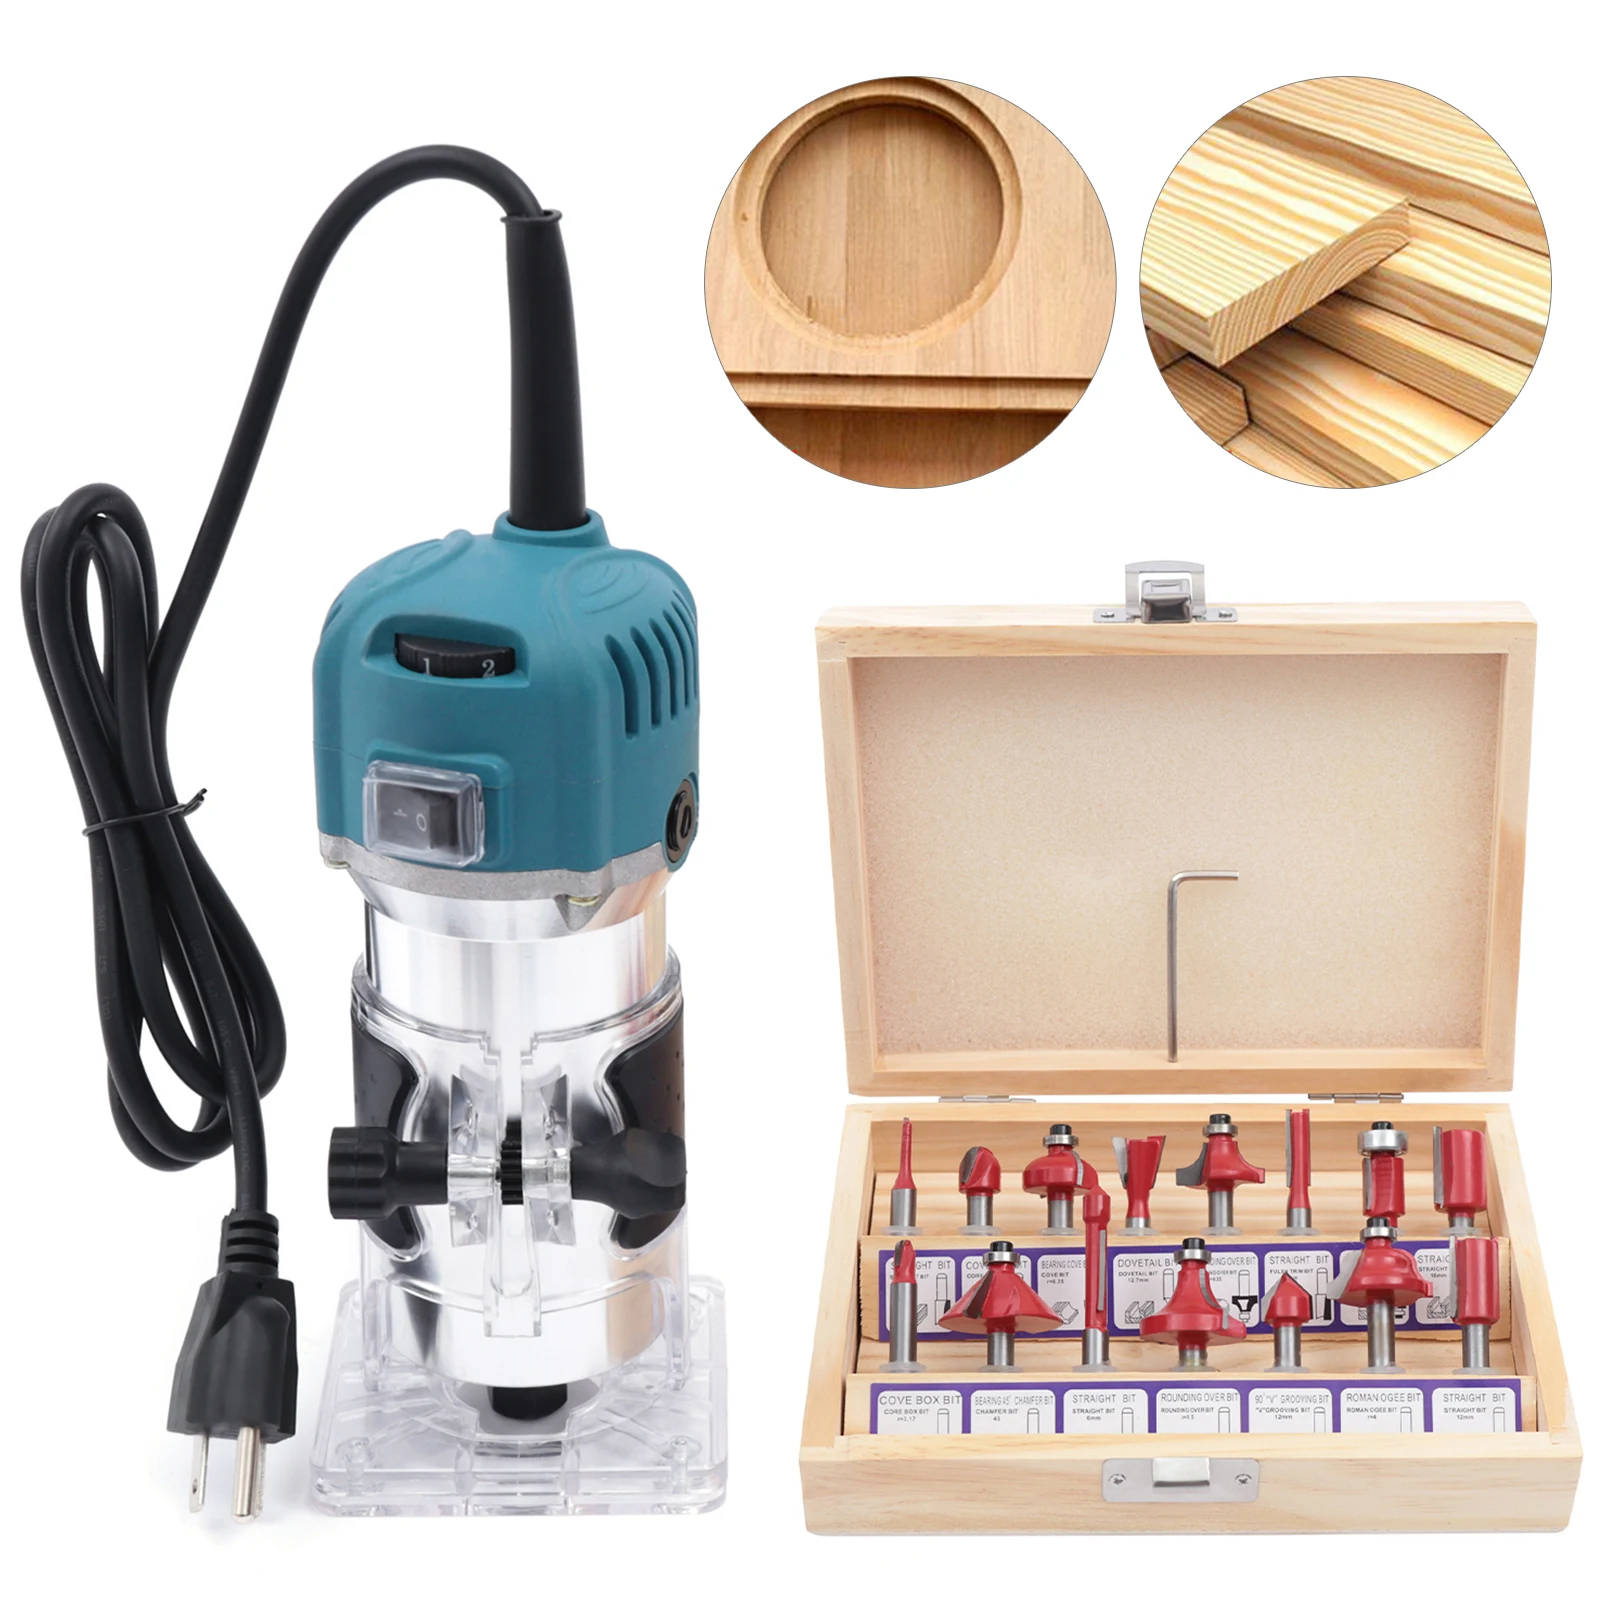 

800W Electric Router Kit Set Wood Palm Laminate Hand Trimmer Variable 6-Speed